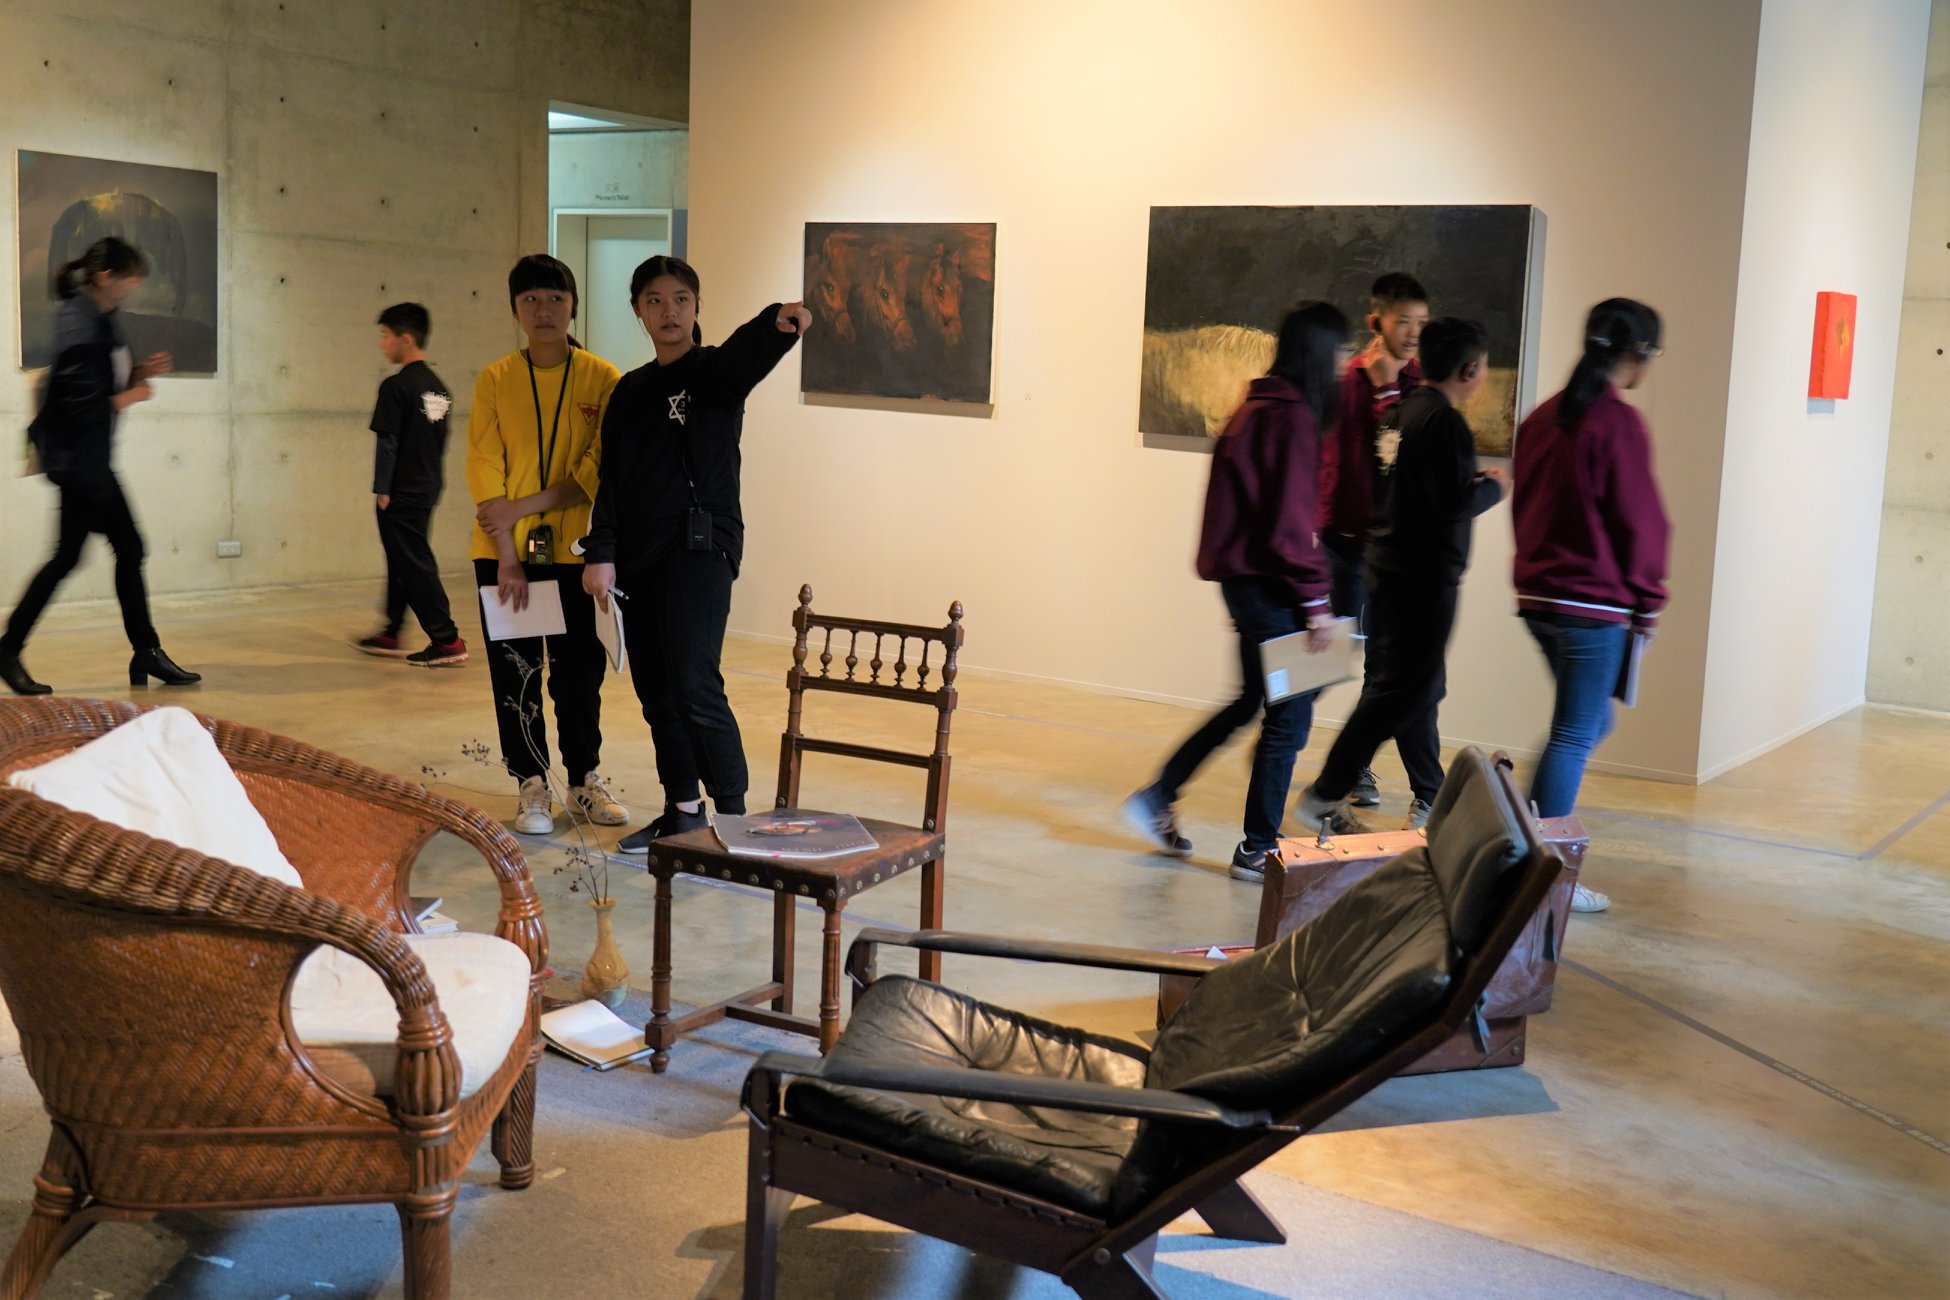  The students stopped in front of Mr. Li Zuxin's studio to discuss the works